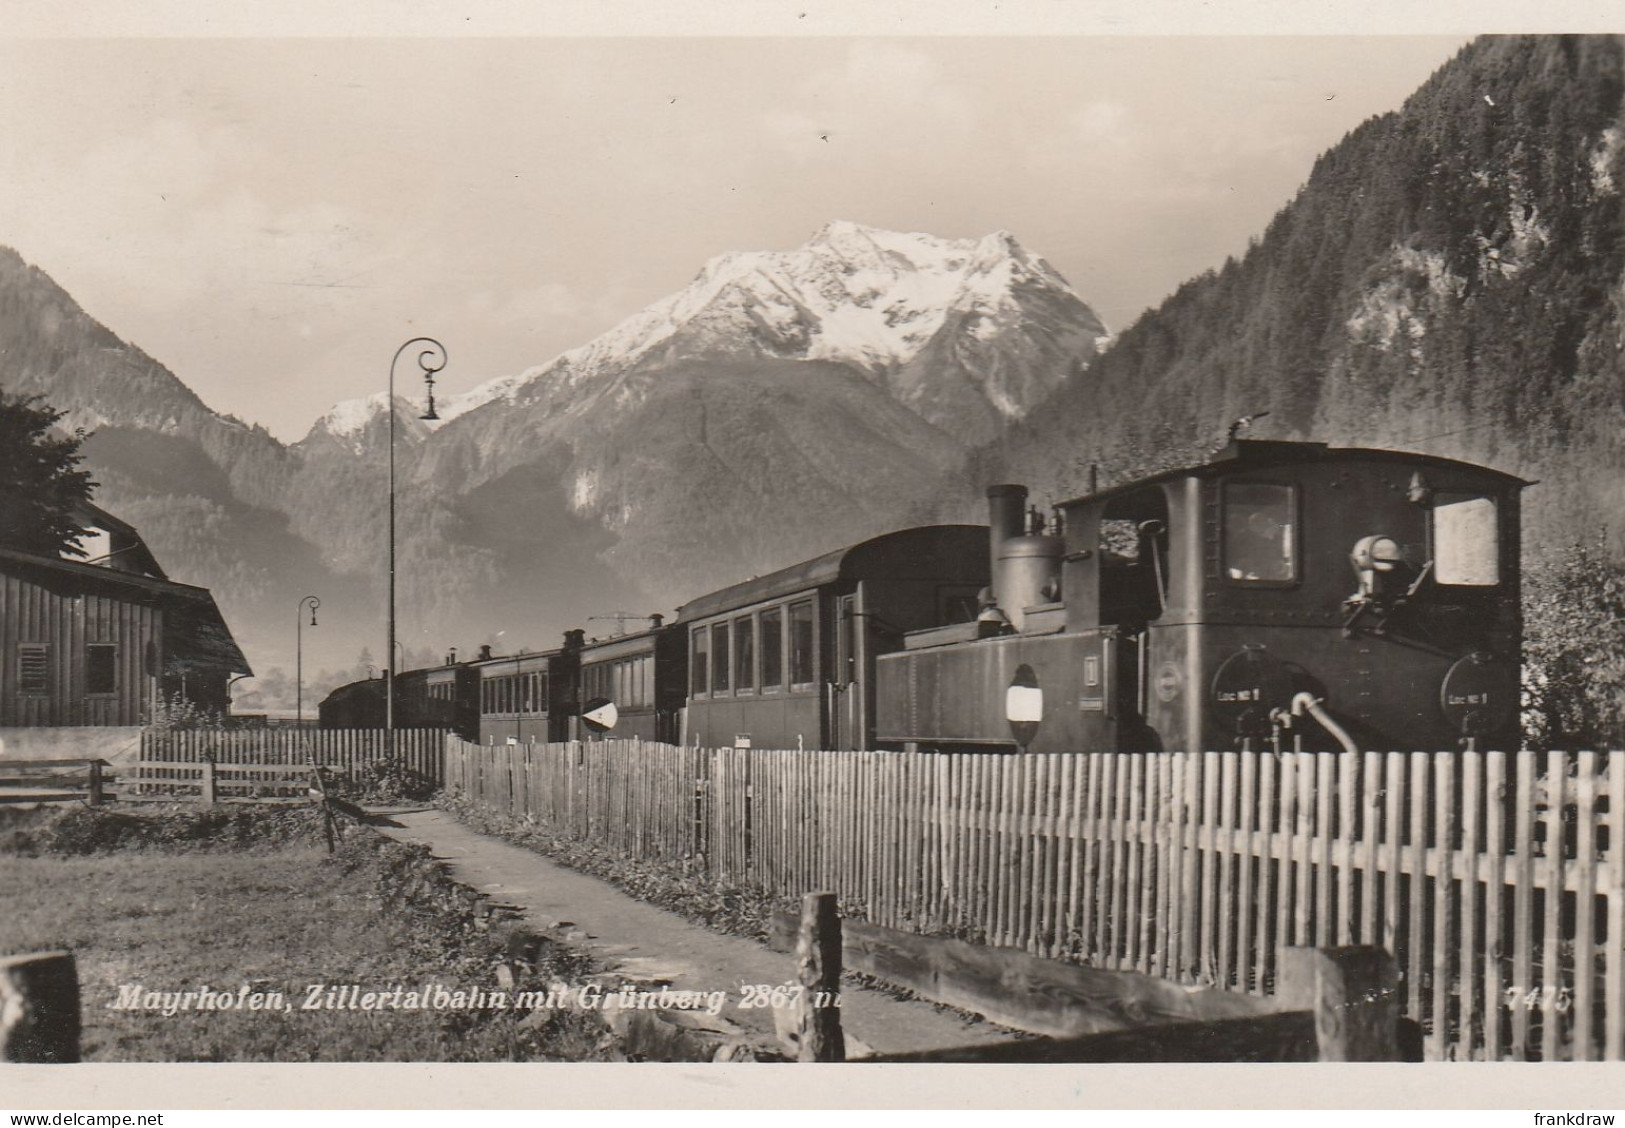 Postcard - Mayrhofen, Zillertaalbahn Mit Grunberg -card No.2867 - Posted But Stamp And Date Stamp Removed Very Good - Non Classés